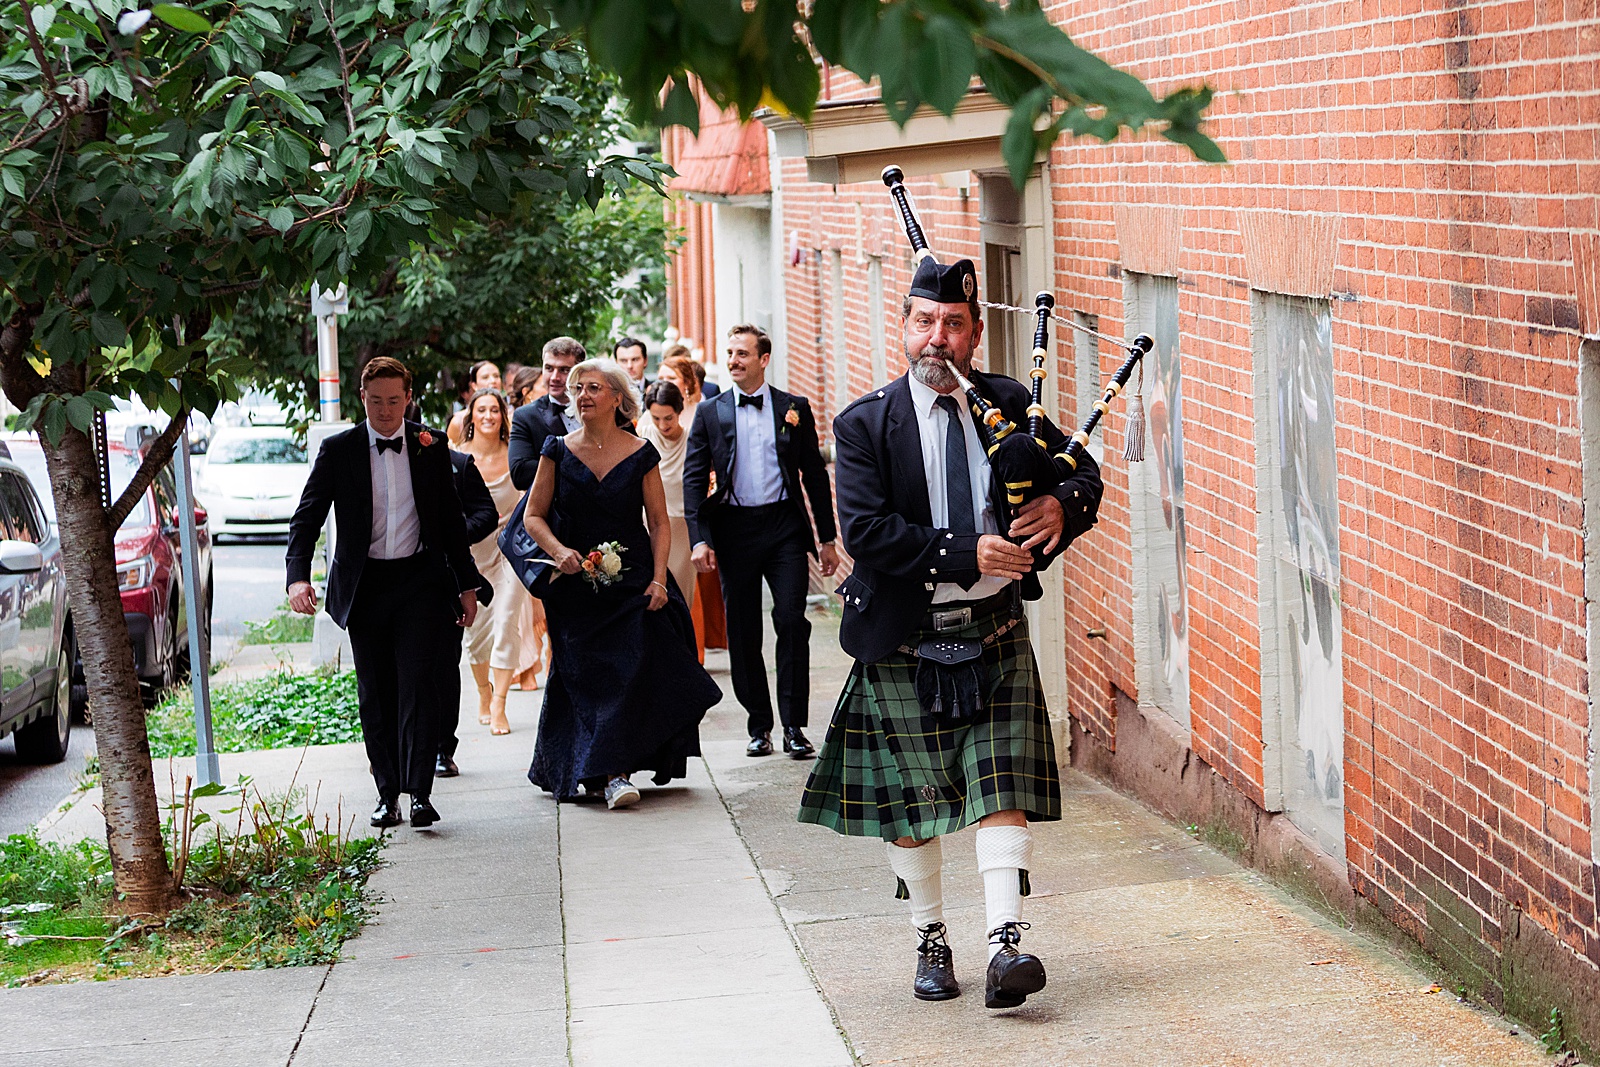 Bagpiper leads wedding guests from church to reception